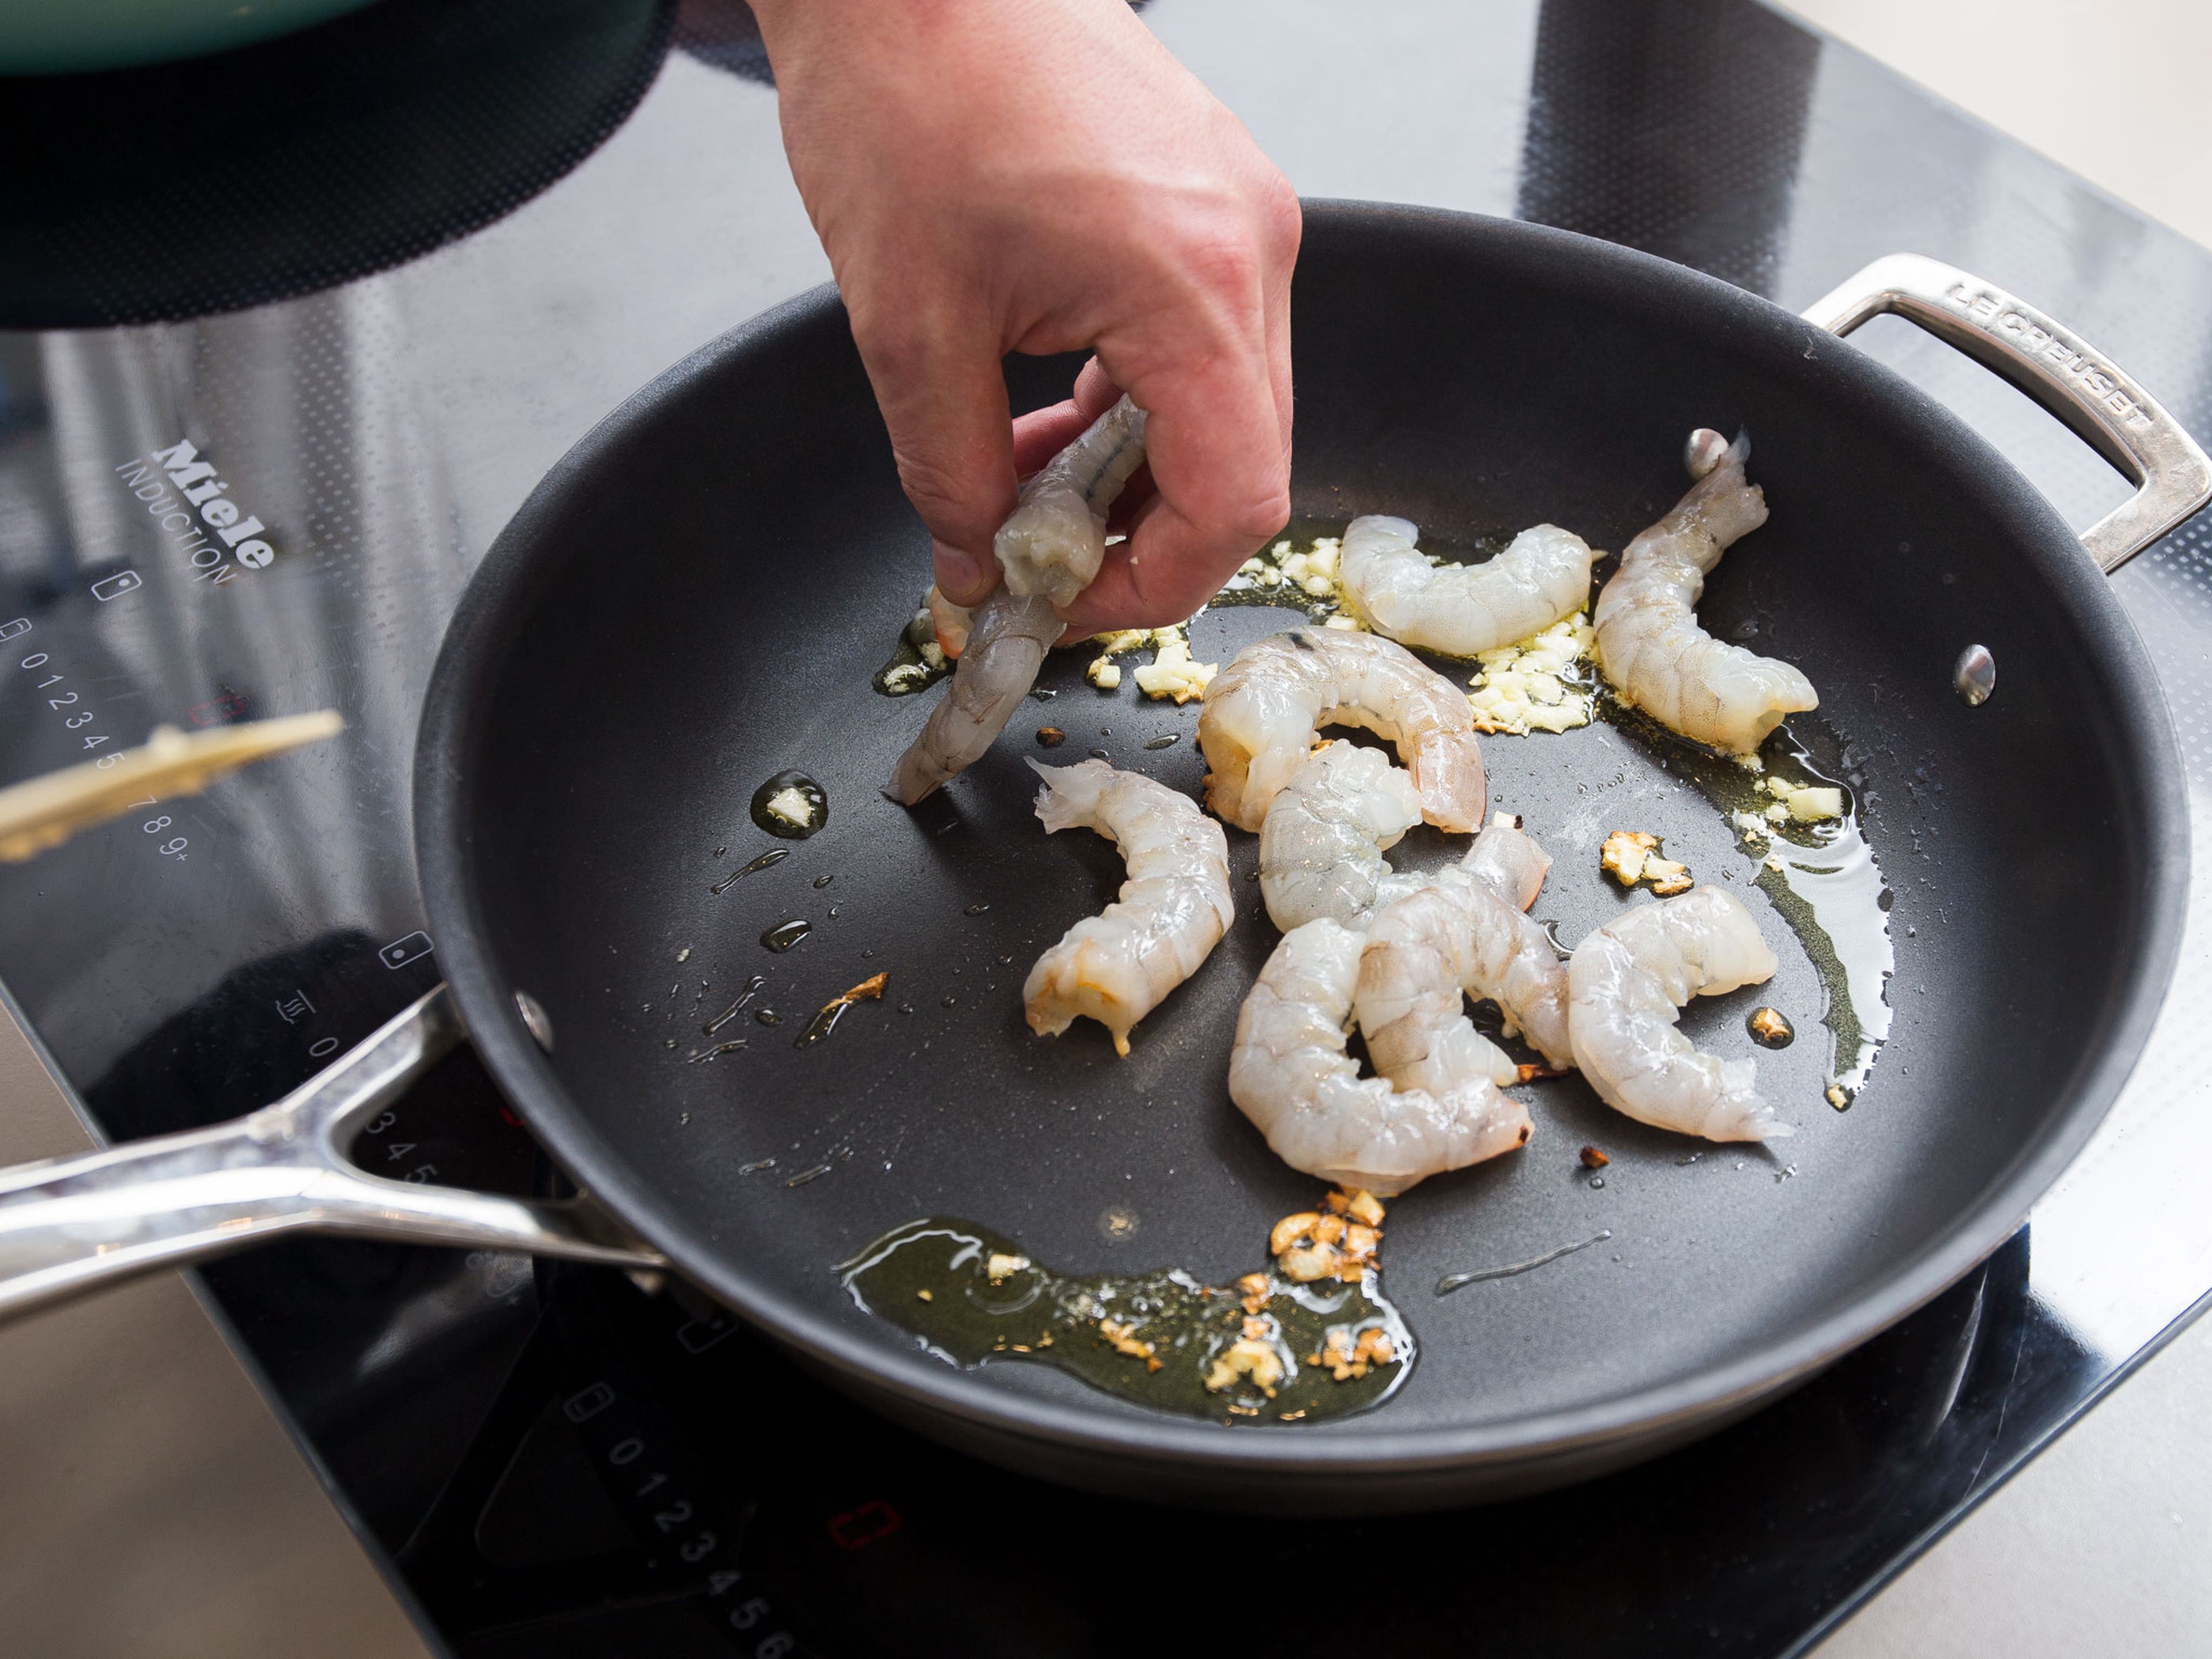 Heat oil in a a second frying pan over medium heat and fry remaining garlic for approx. 1 – 2 min. Add shrimp to pan and season with salt and pepper. Reduce heat to medium-low and fry shrimp on both sides for approx. 15 sec. Deglaze with lemon juice. Serve shrimp with coconut rice and baby bok choy. Enjoy!